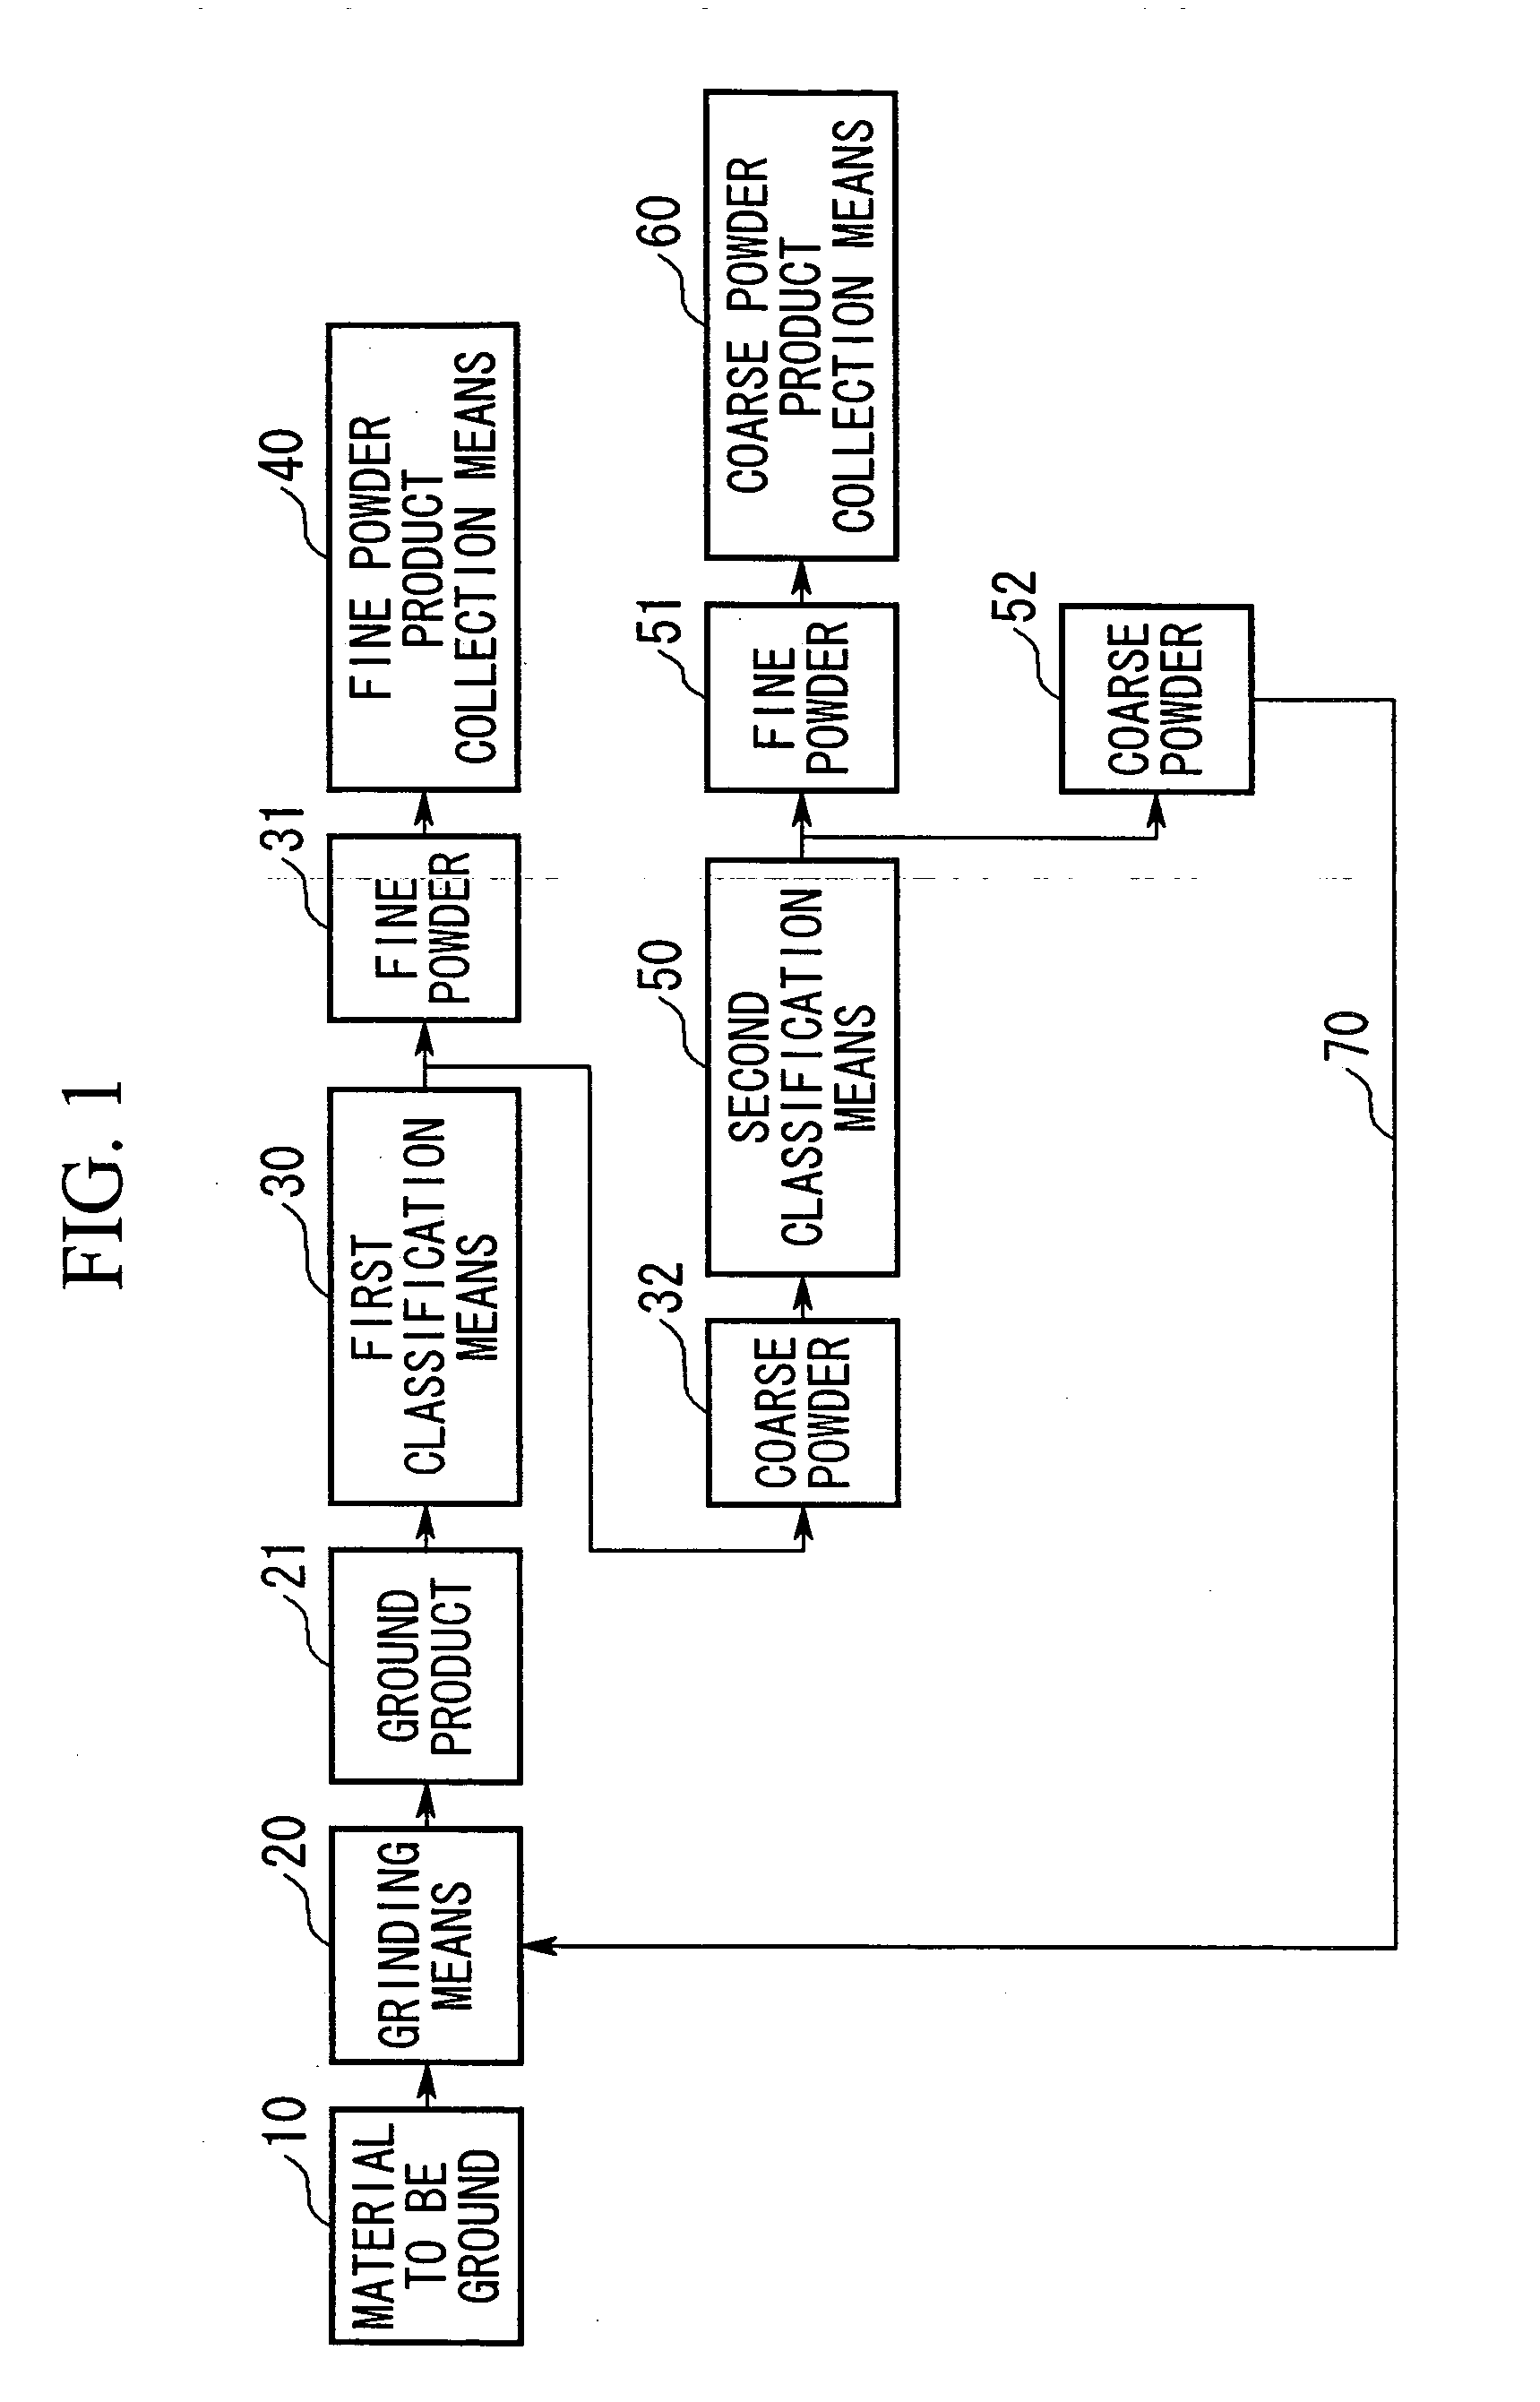 Dry grinding system and dry grinding method